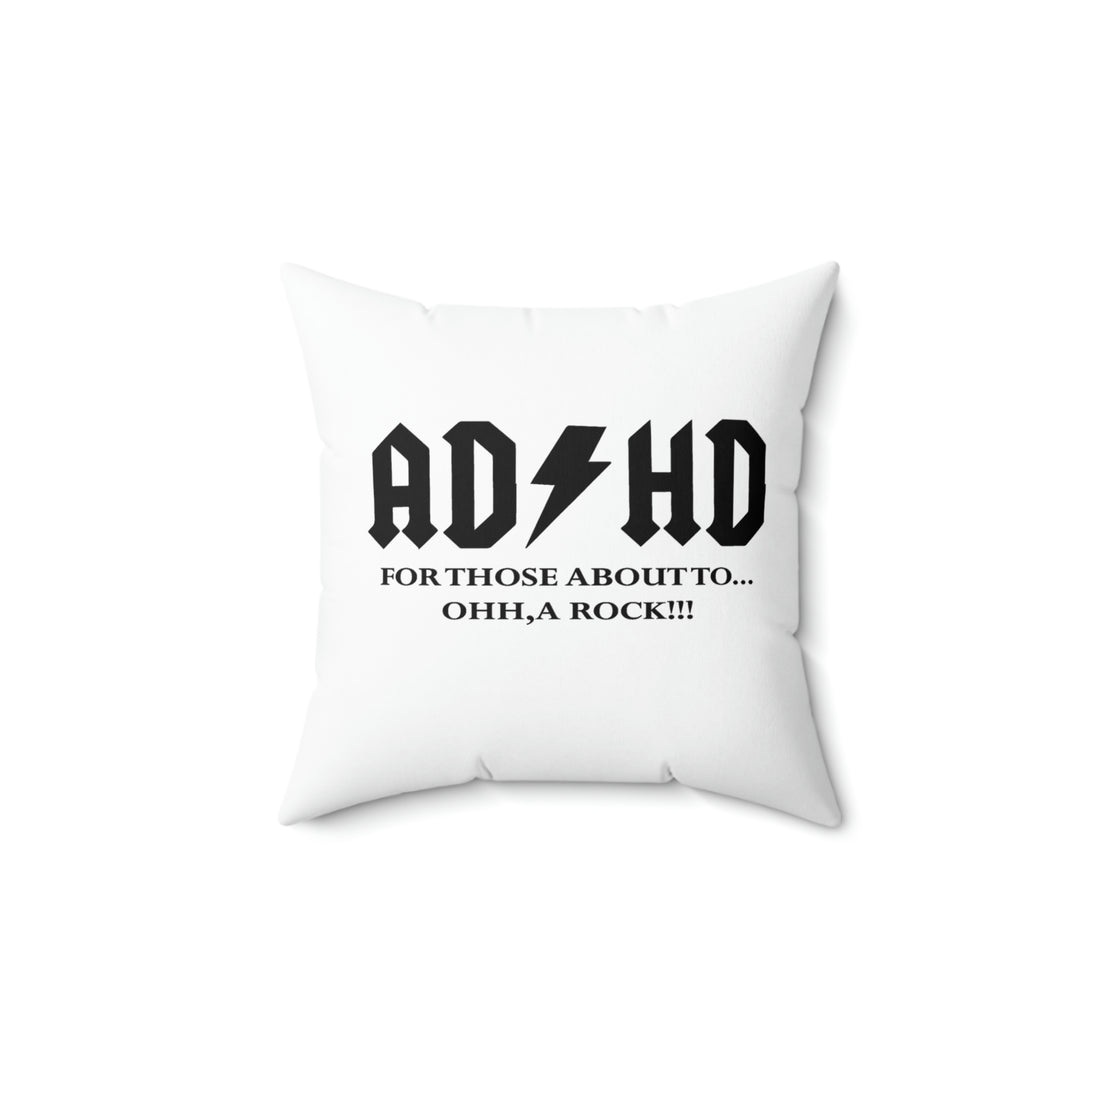 ADHD Look a Rock -  White Pillow